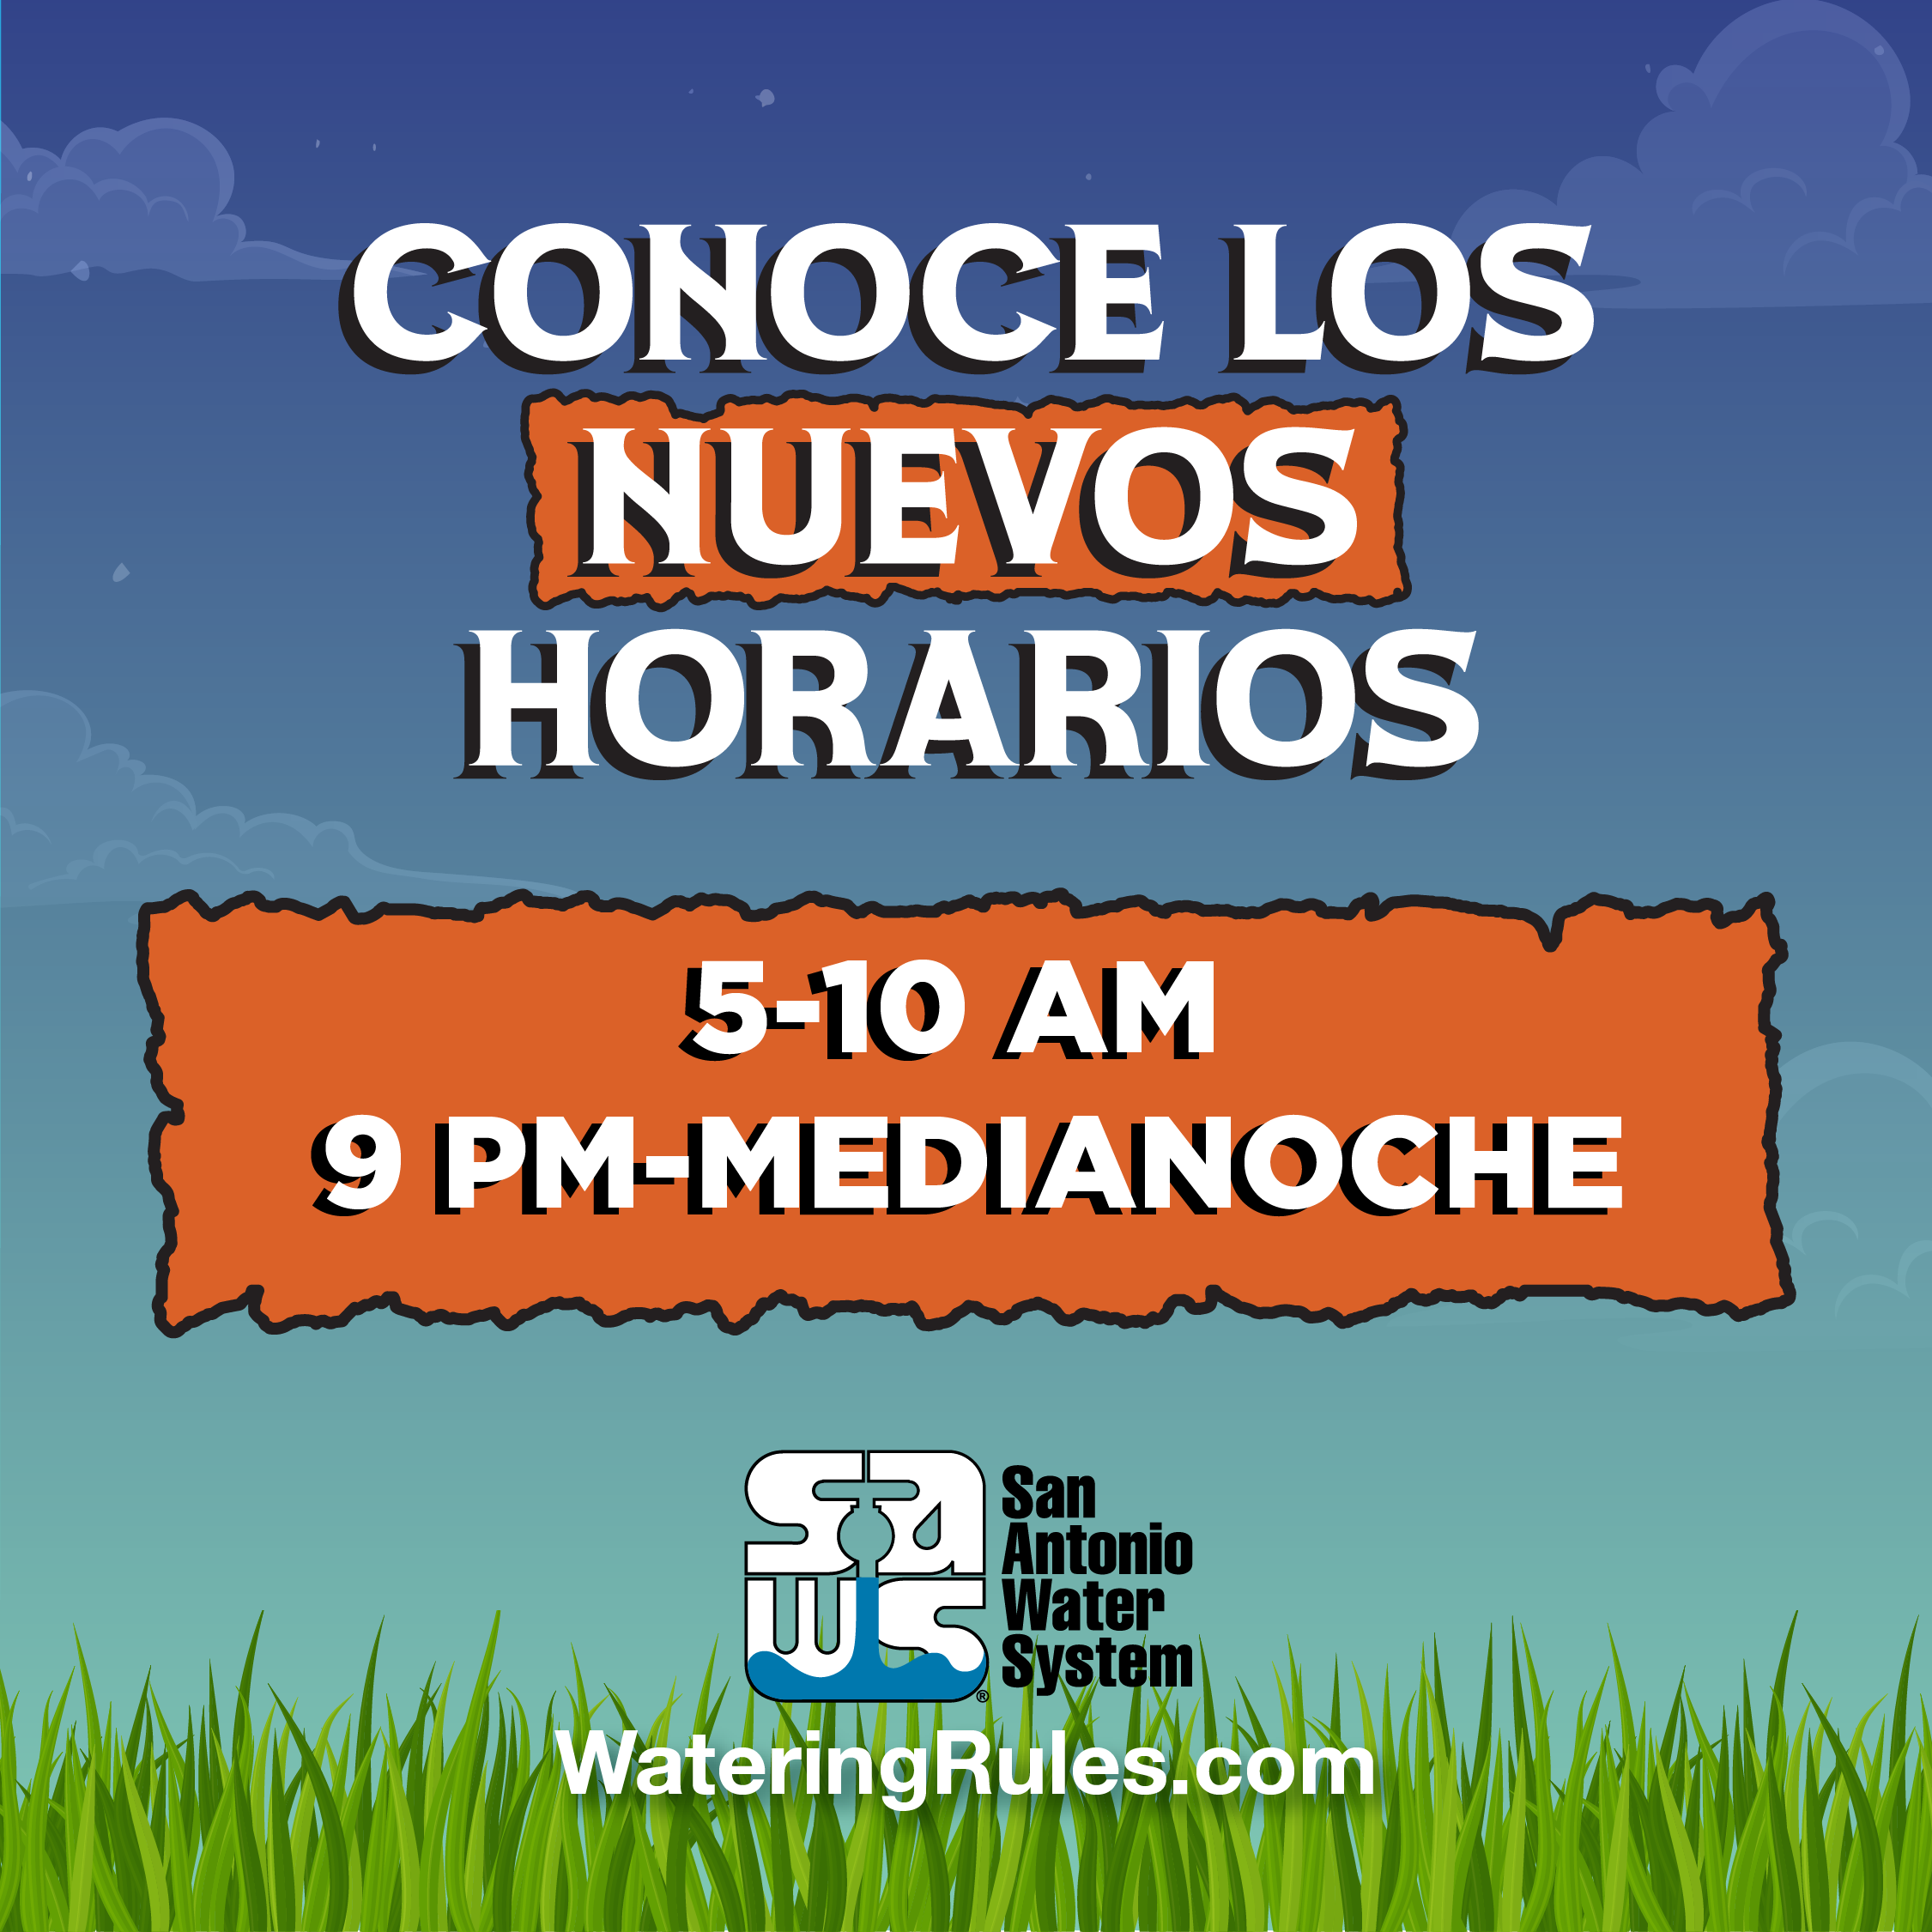 Know the New Watering Hours: 5-10 AM & 9 PM - MIDNIGHT